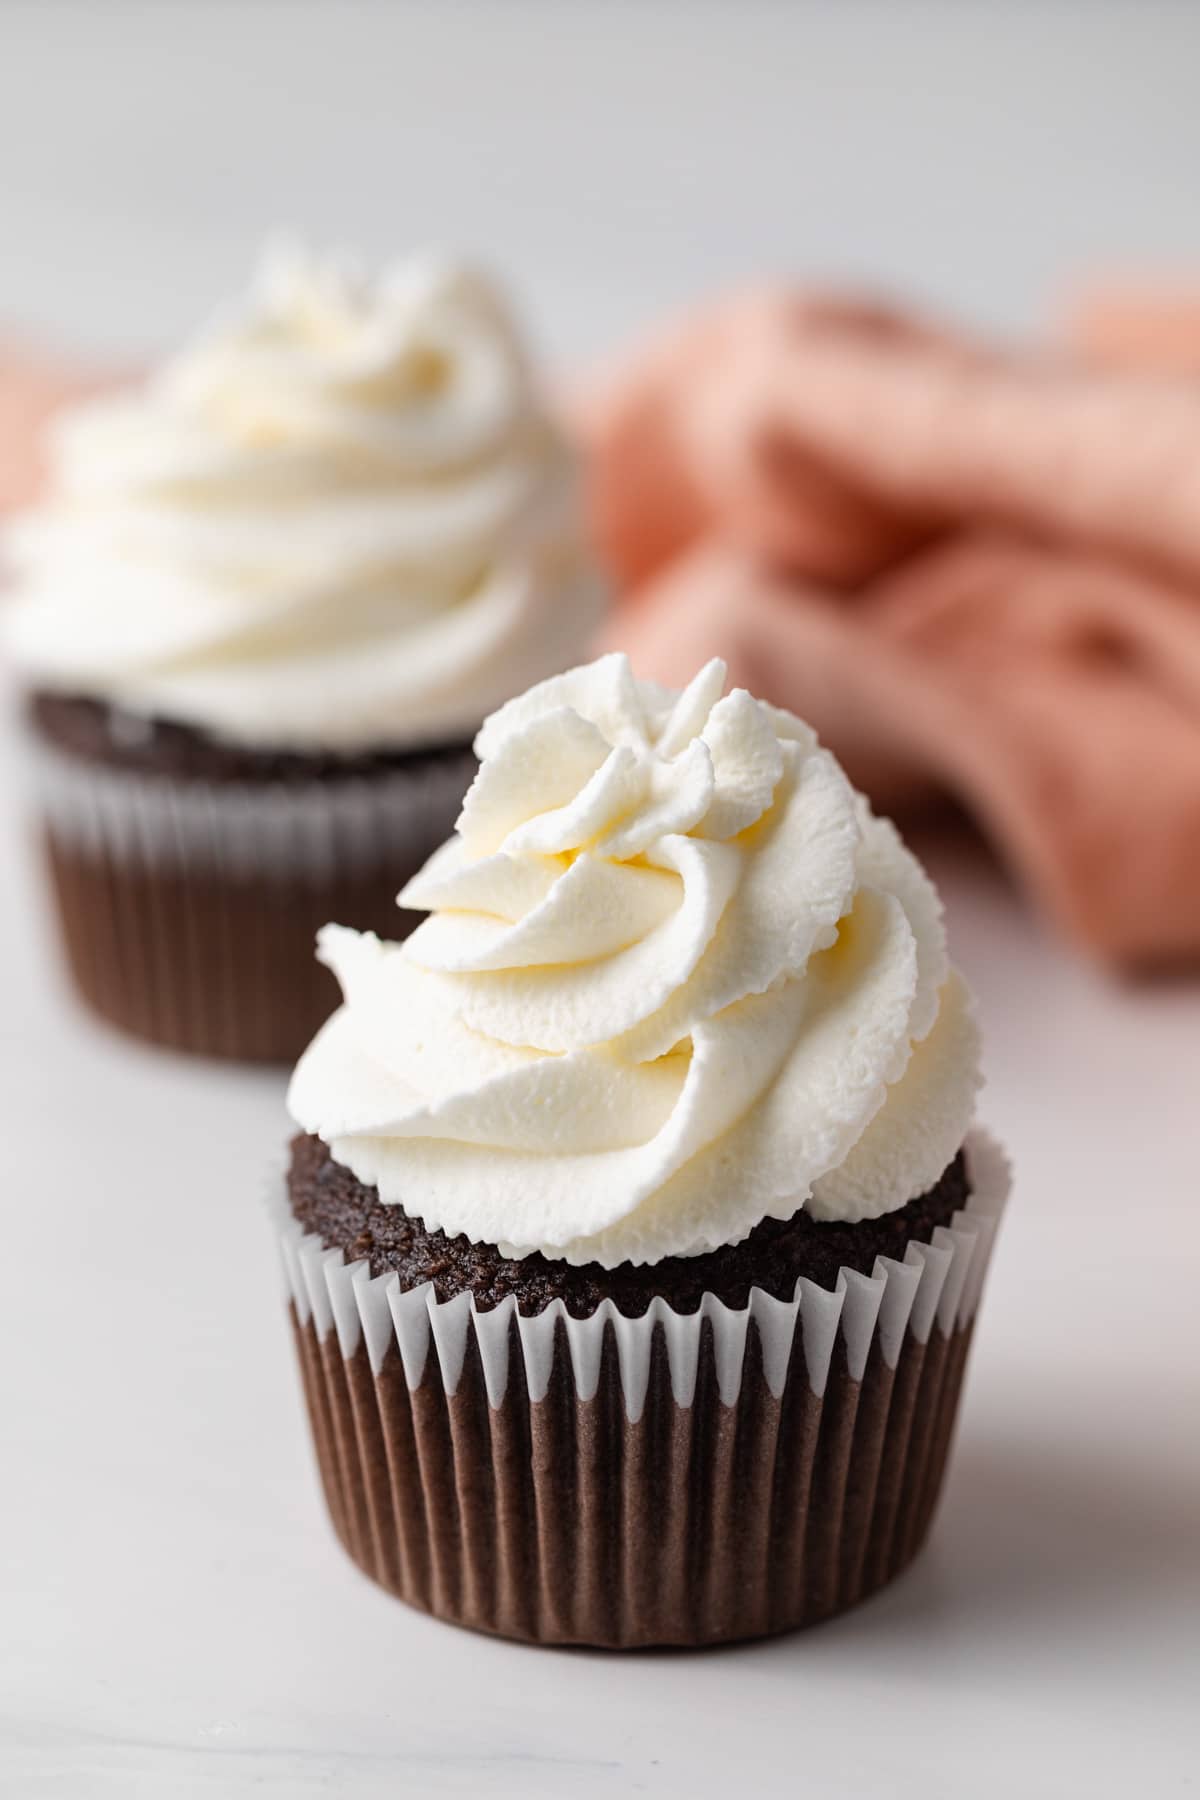 whipped cream swirled on top of chocolate cupcakes